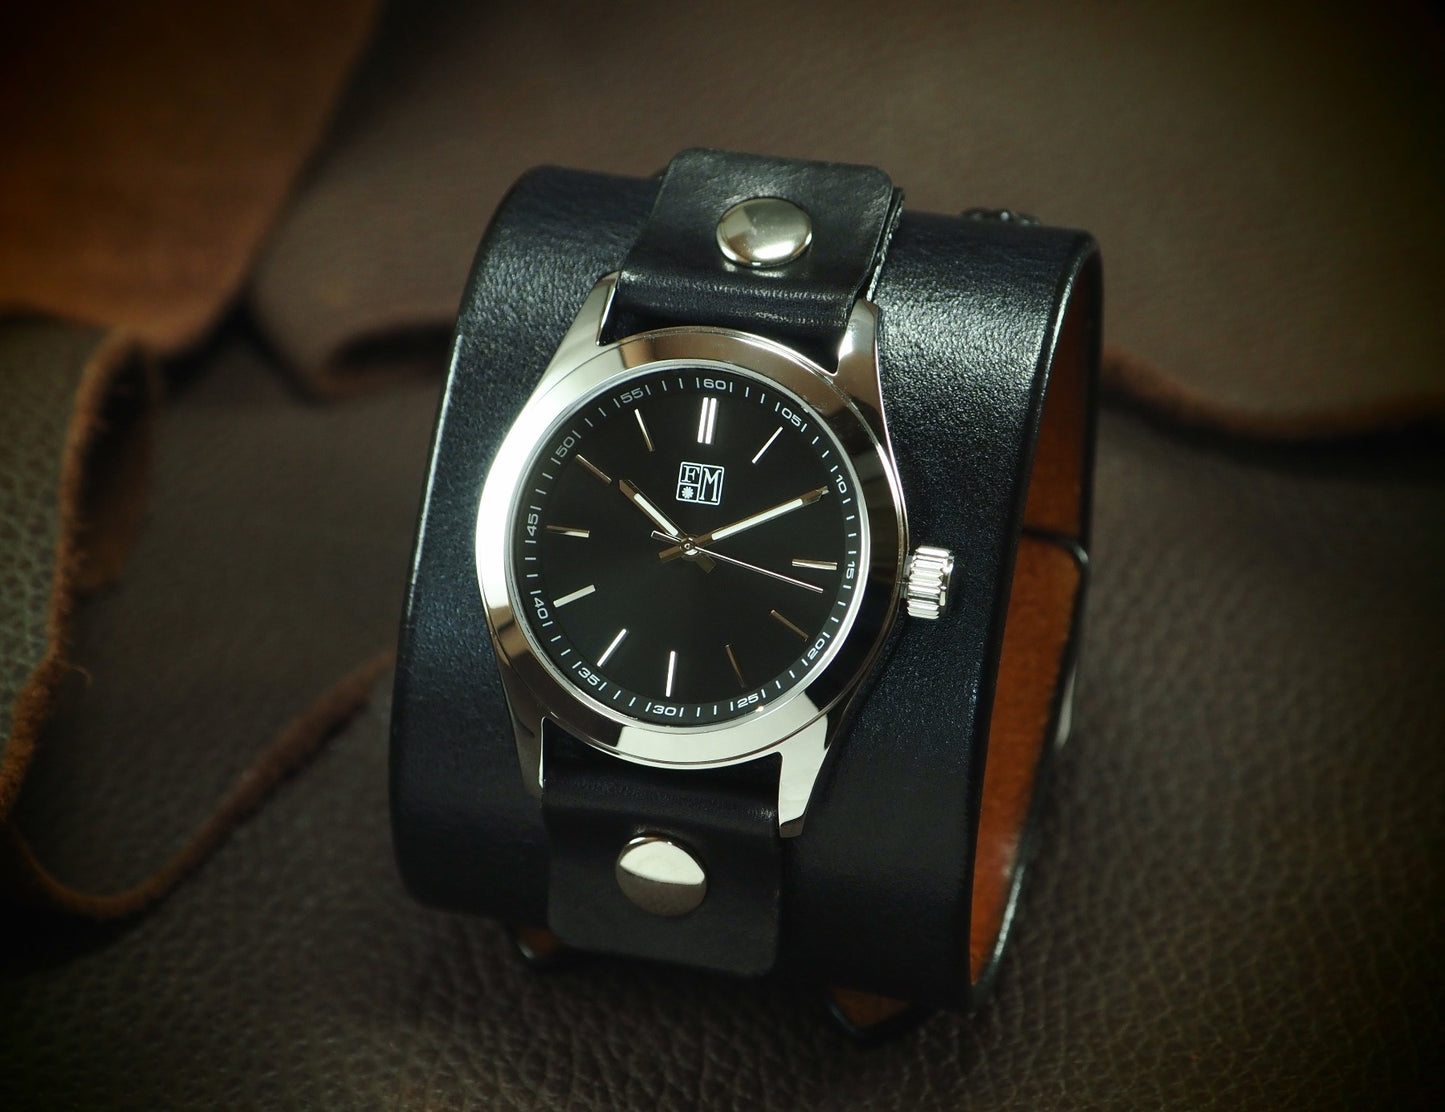 Black Leather cuff watch : Refined Retro Vintage style